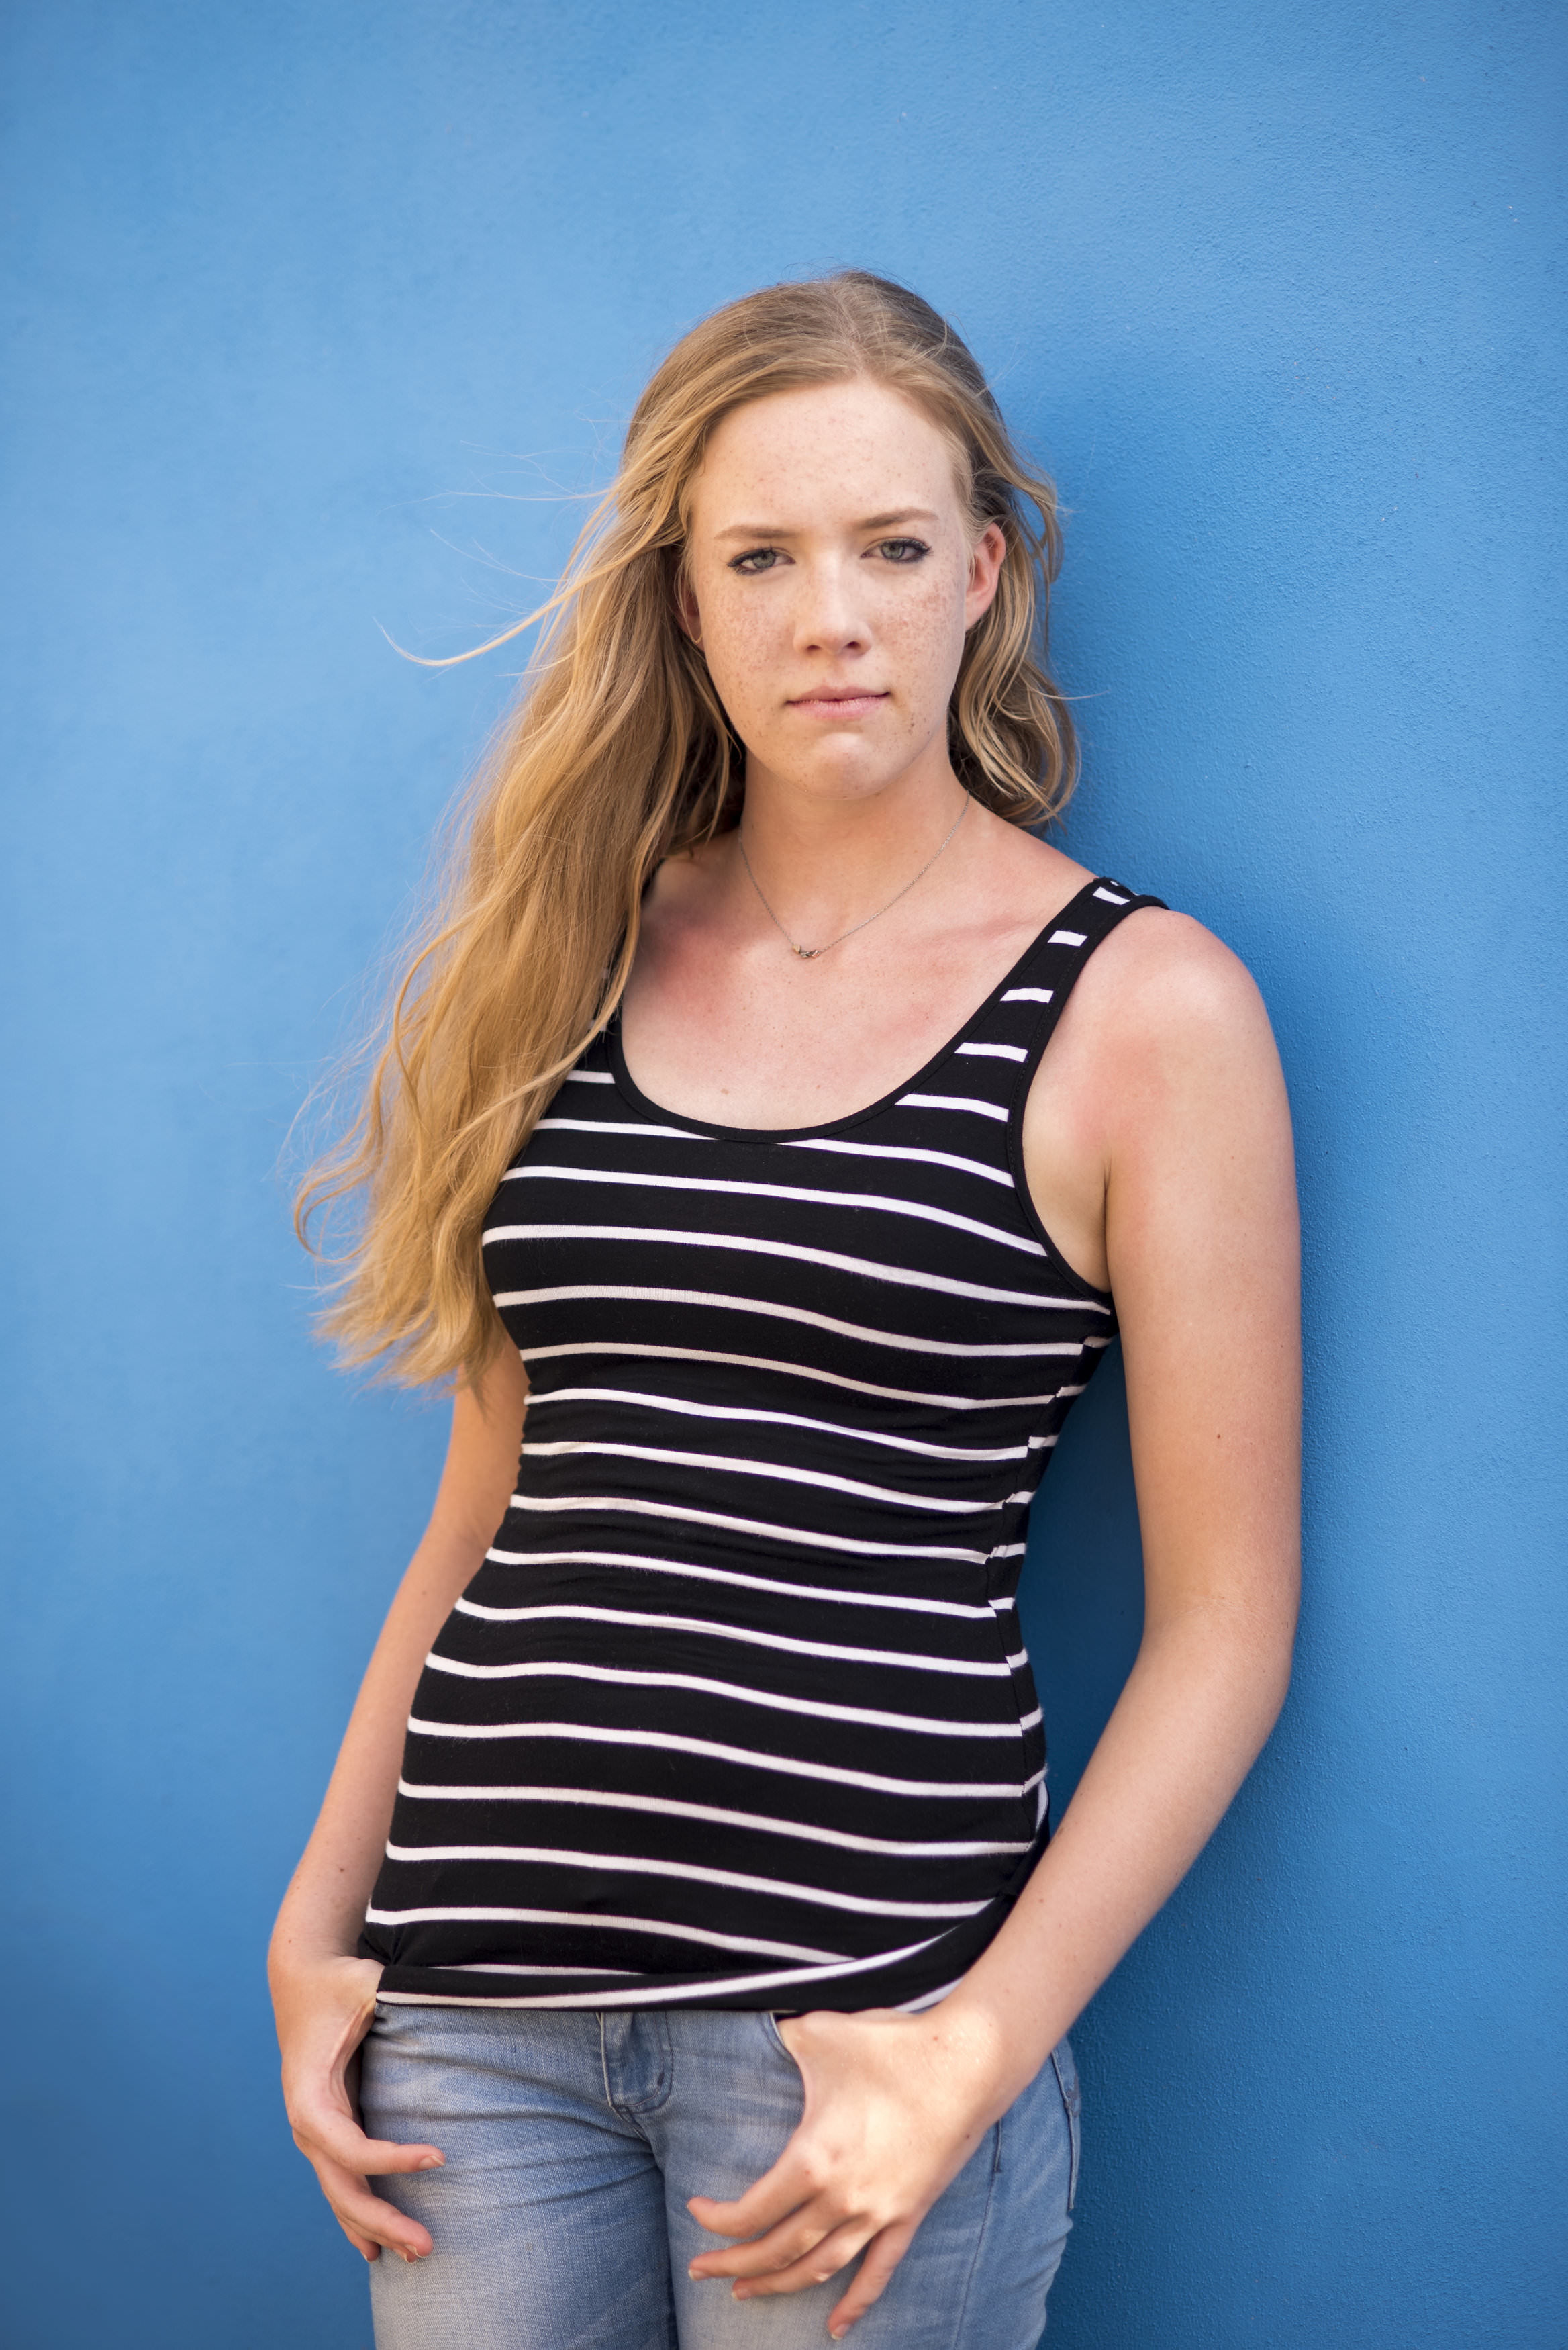 Senior Photo in front of bright blue wall wearing striped black and white tank top and jeans